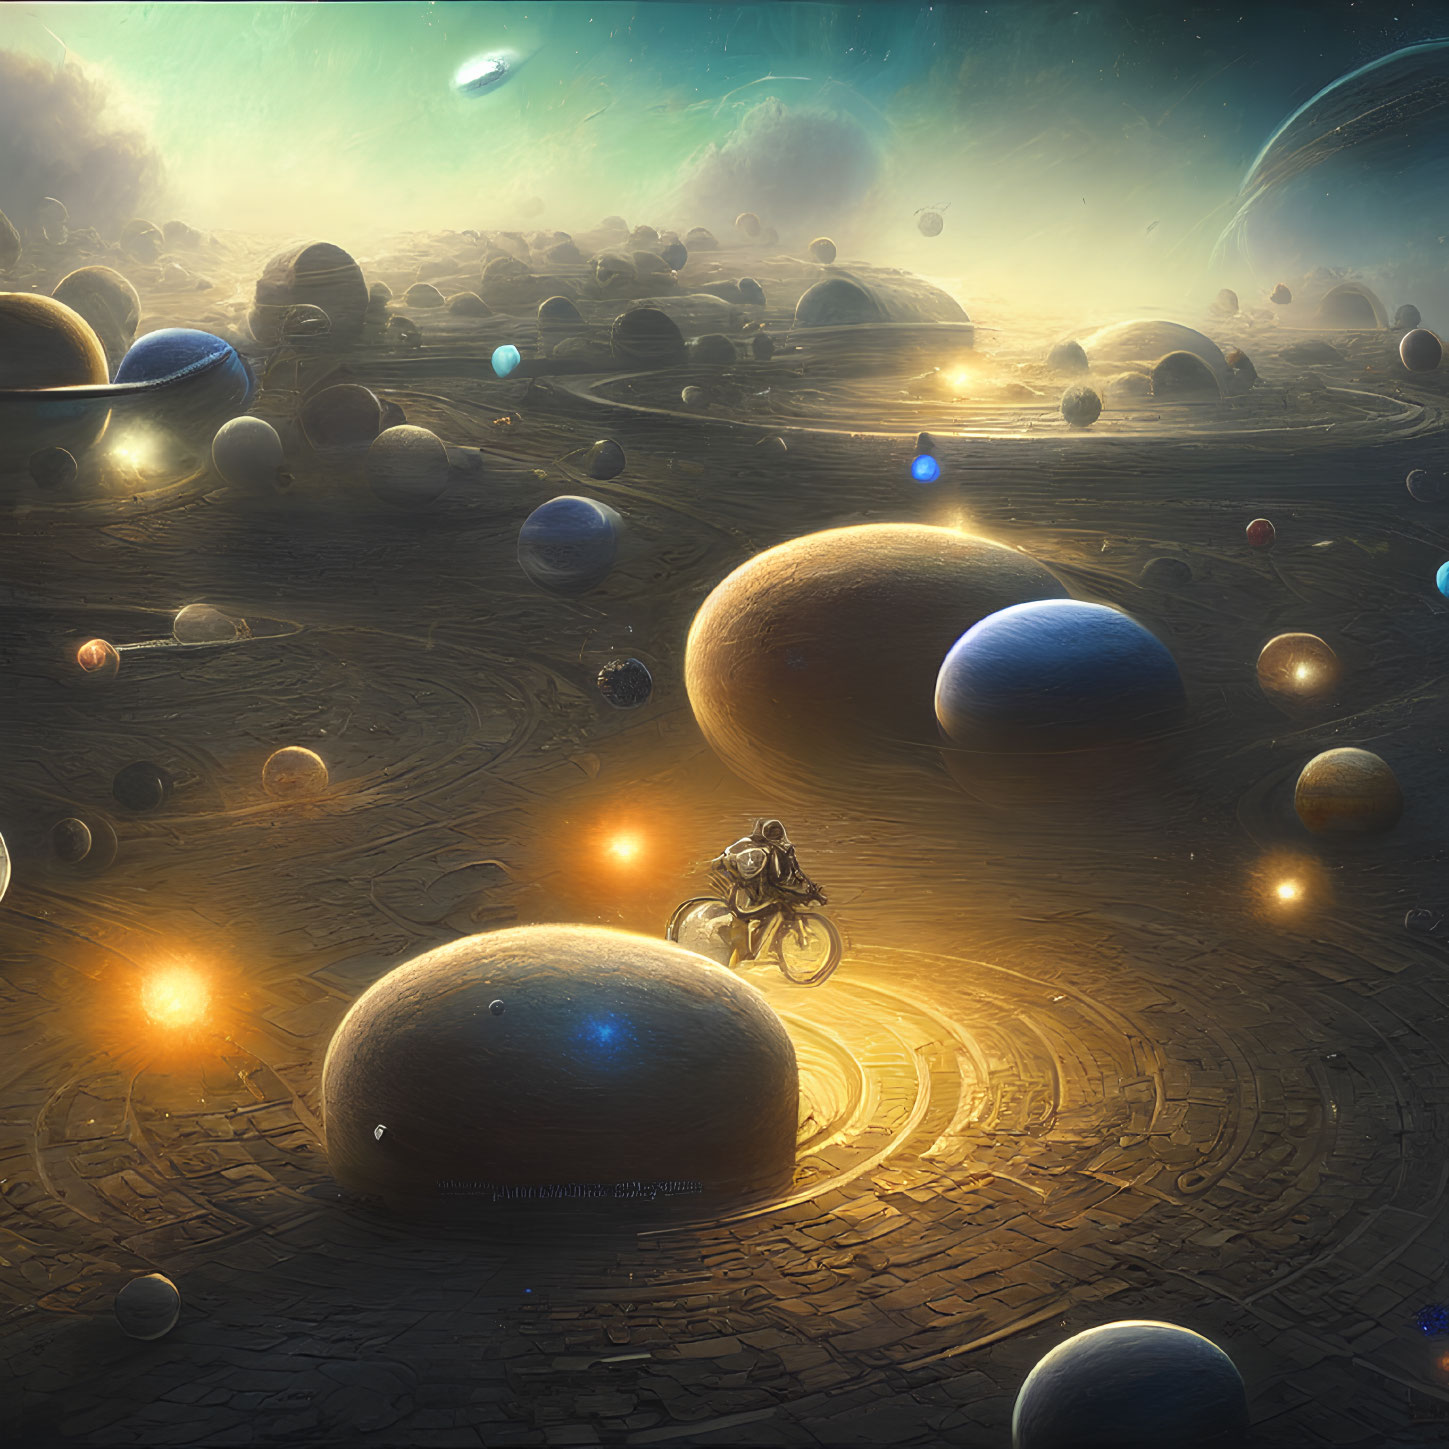 Motorcyclist on cosmic pathway among planets and stars